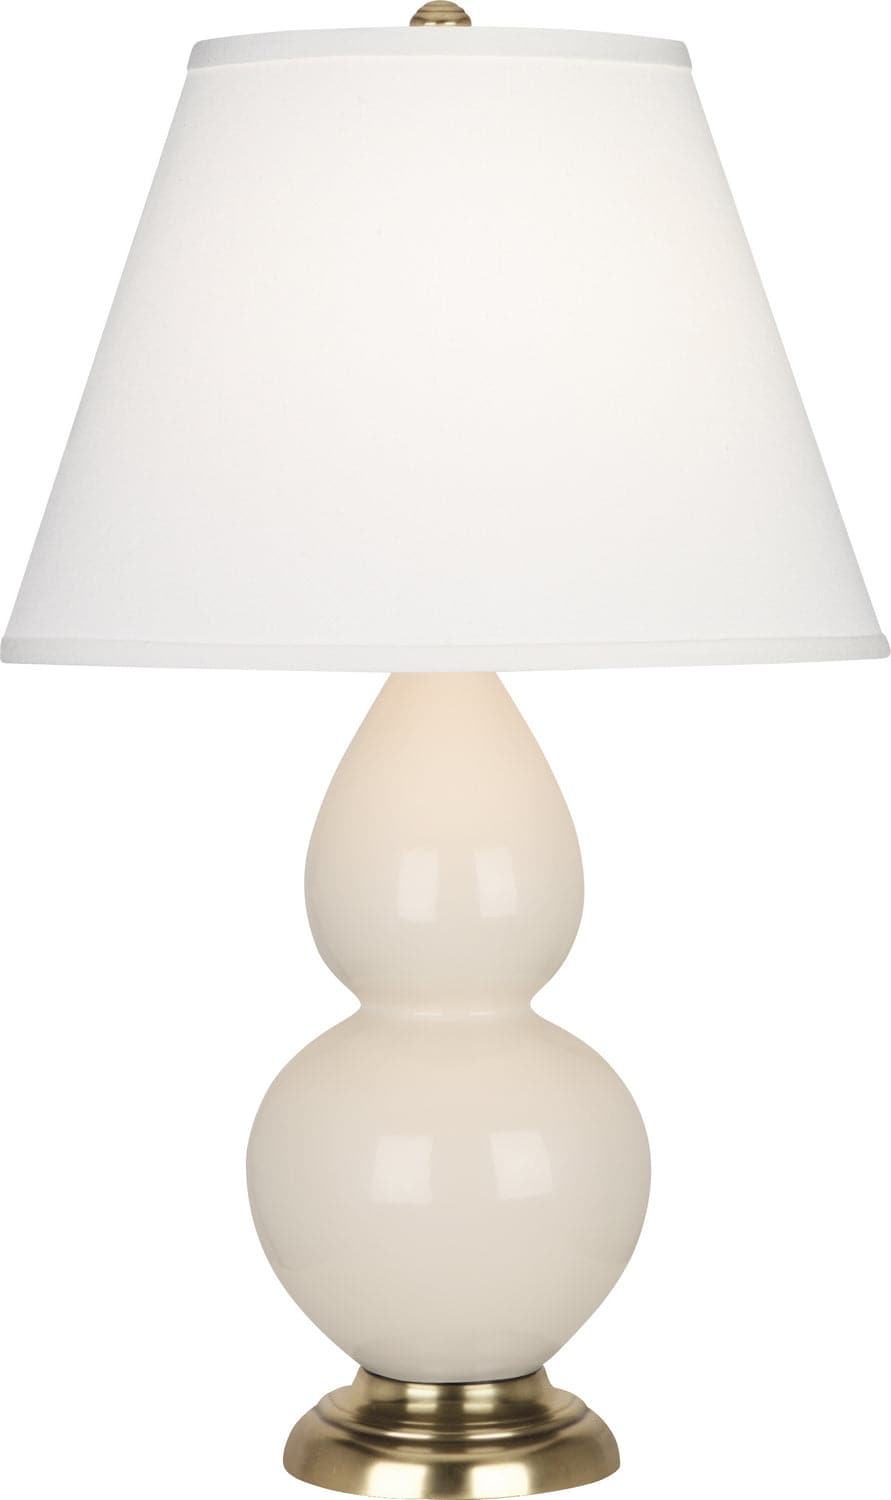 Robert Abbey - 1774X - One Light Accent Lamp - Small Double Gourd - Bone Glazed w/Antique Natural Brass